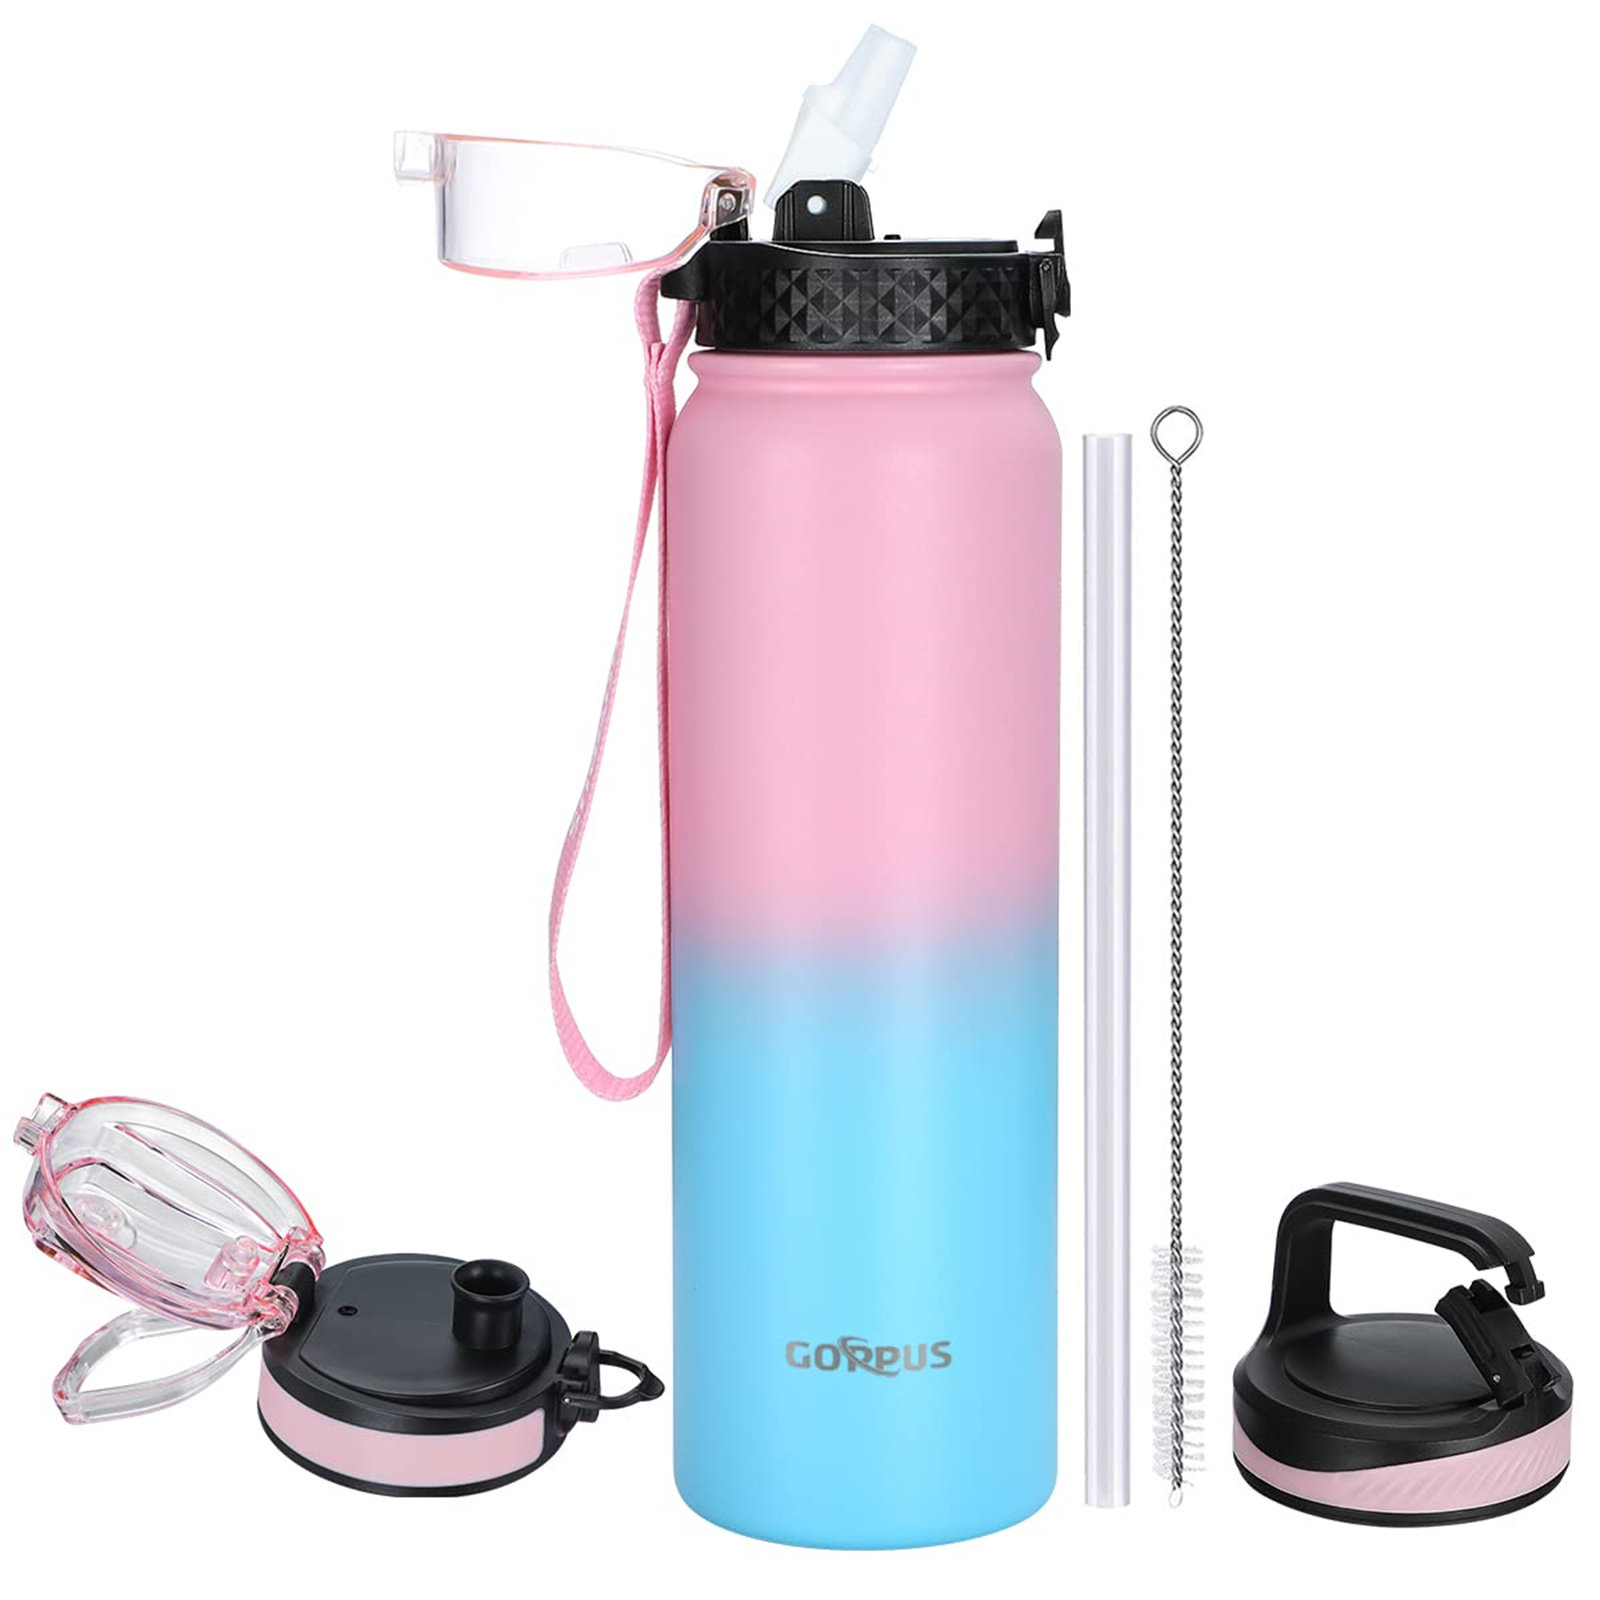 Peaceful Valley 32oz. Insulated Stainless Steel Water Bottle Straw